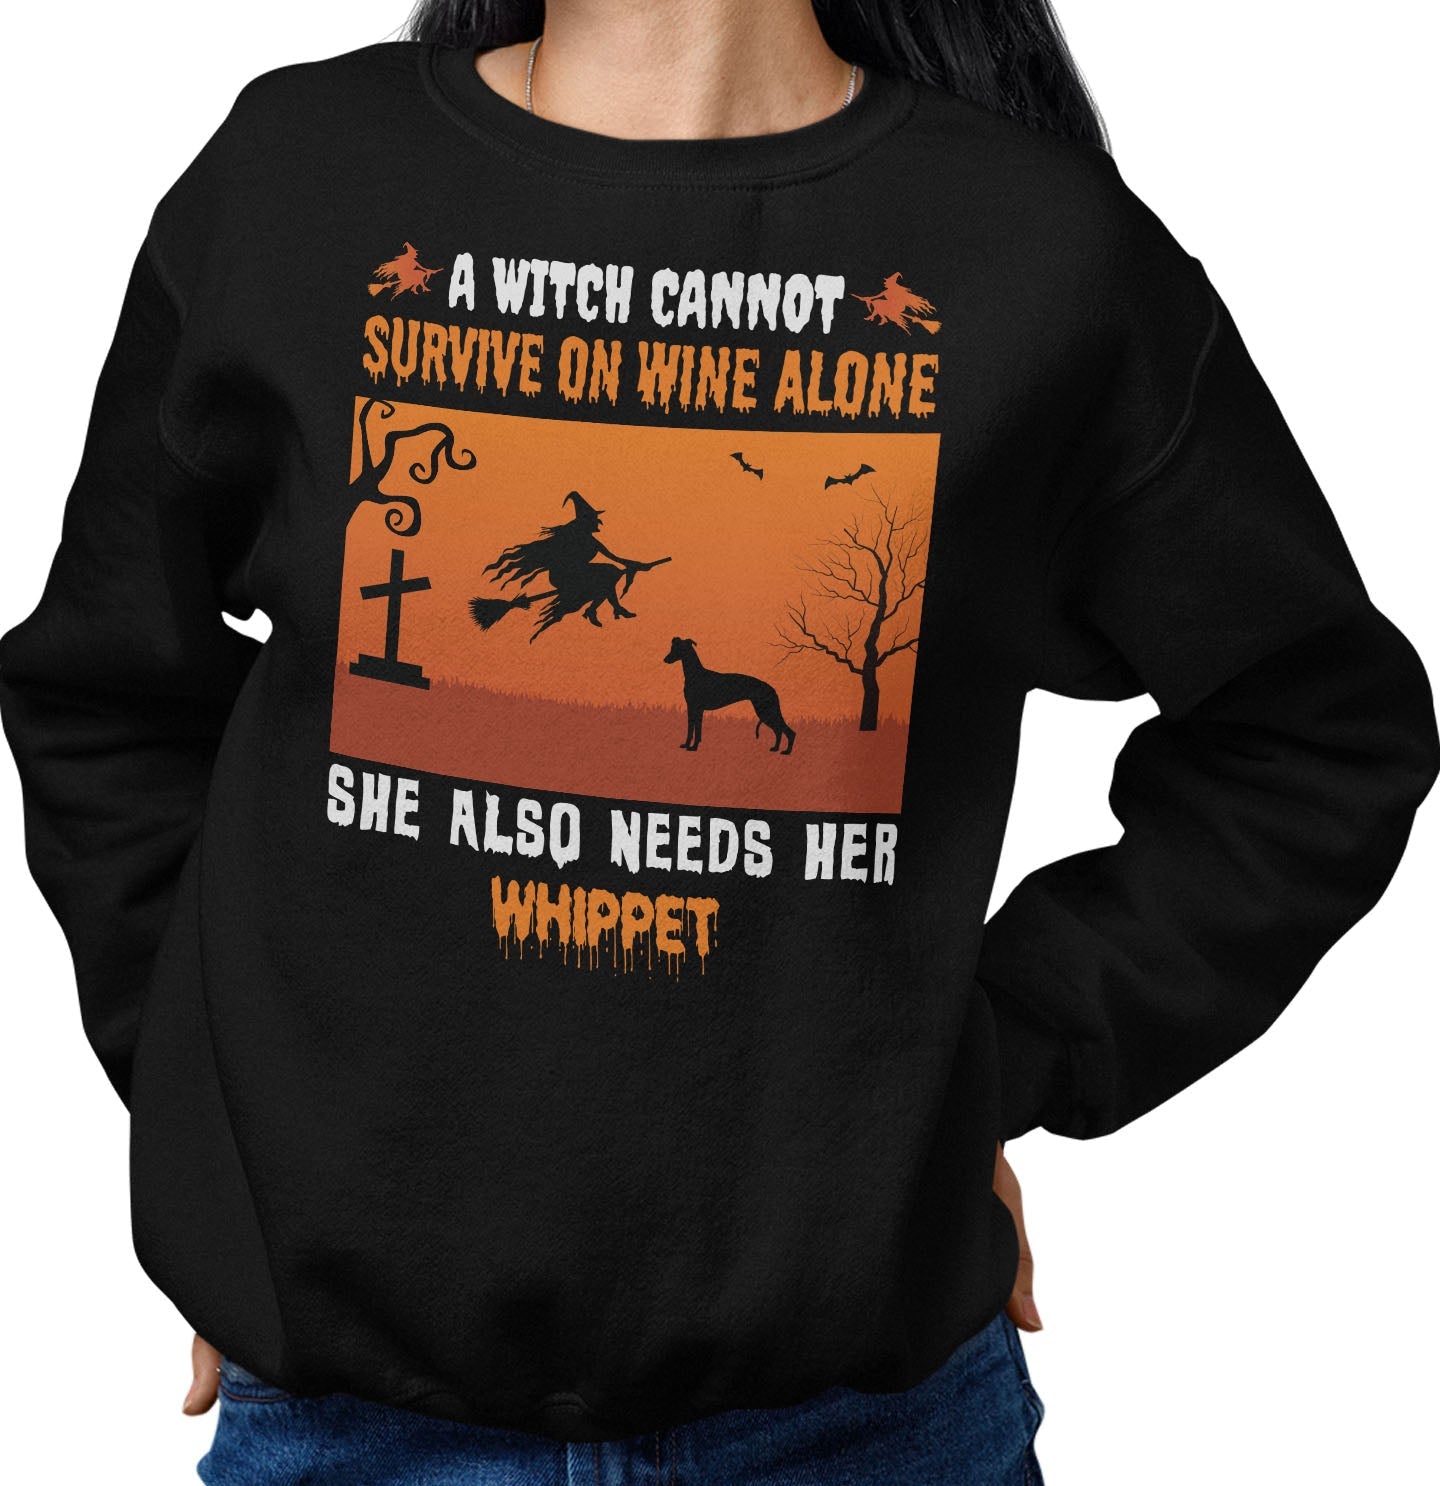 A Witch Needs Her Whippet - Adult Unisex Crewneck Sweatshirt